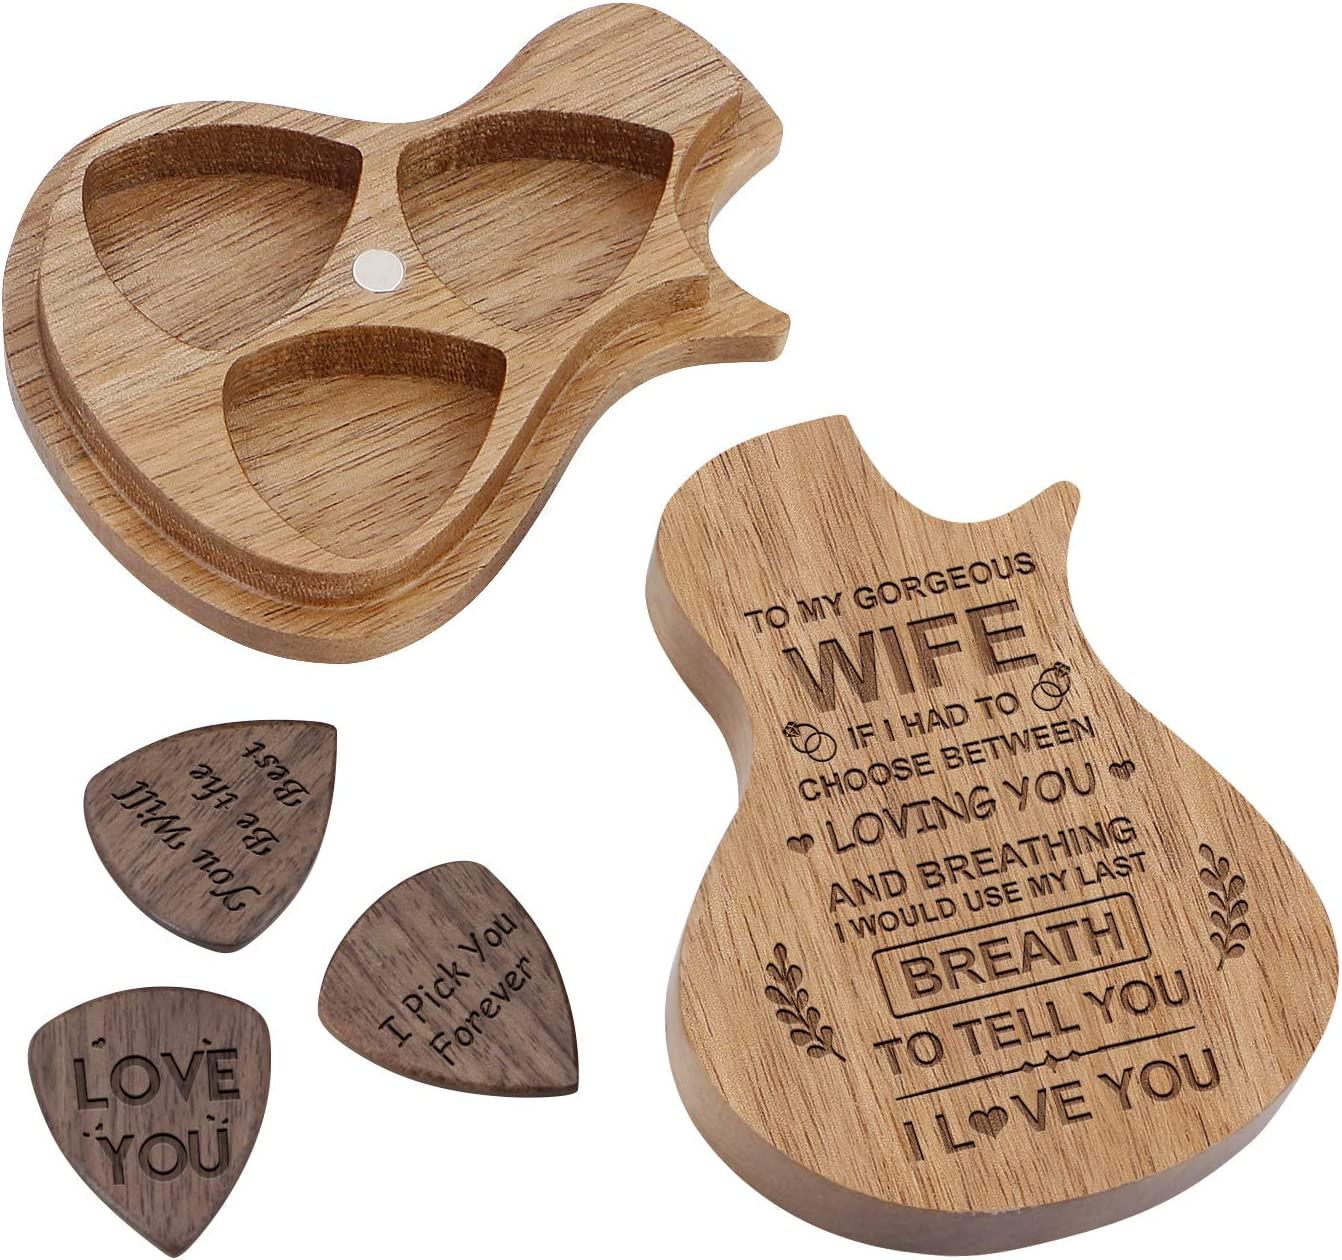 To My Gorgeous Wife 🎁- I Pick You Wood Guitar Picks With Case